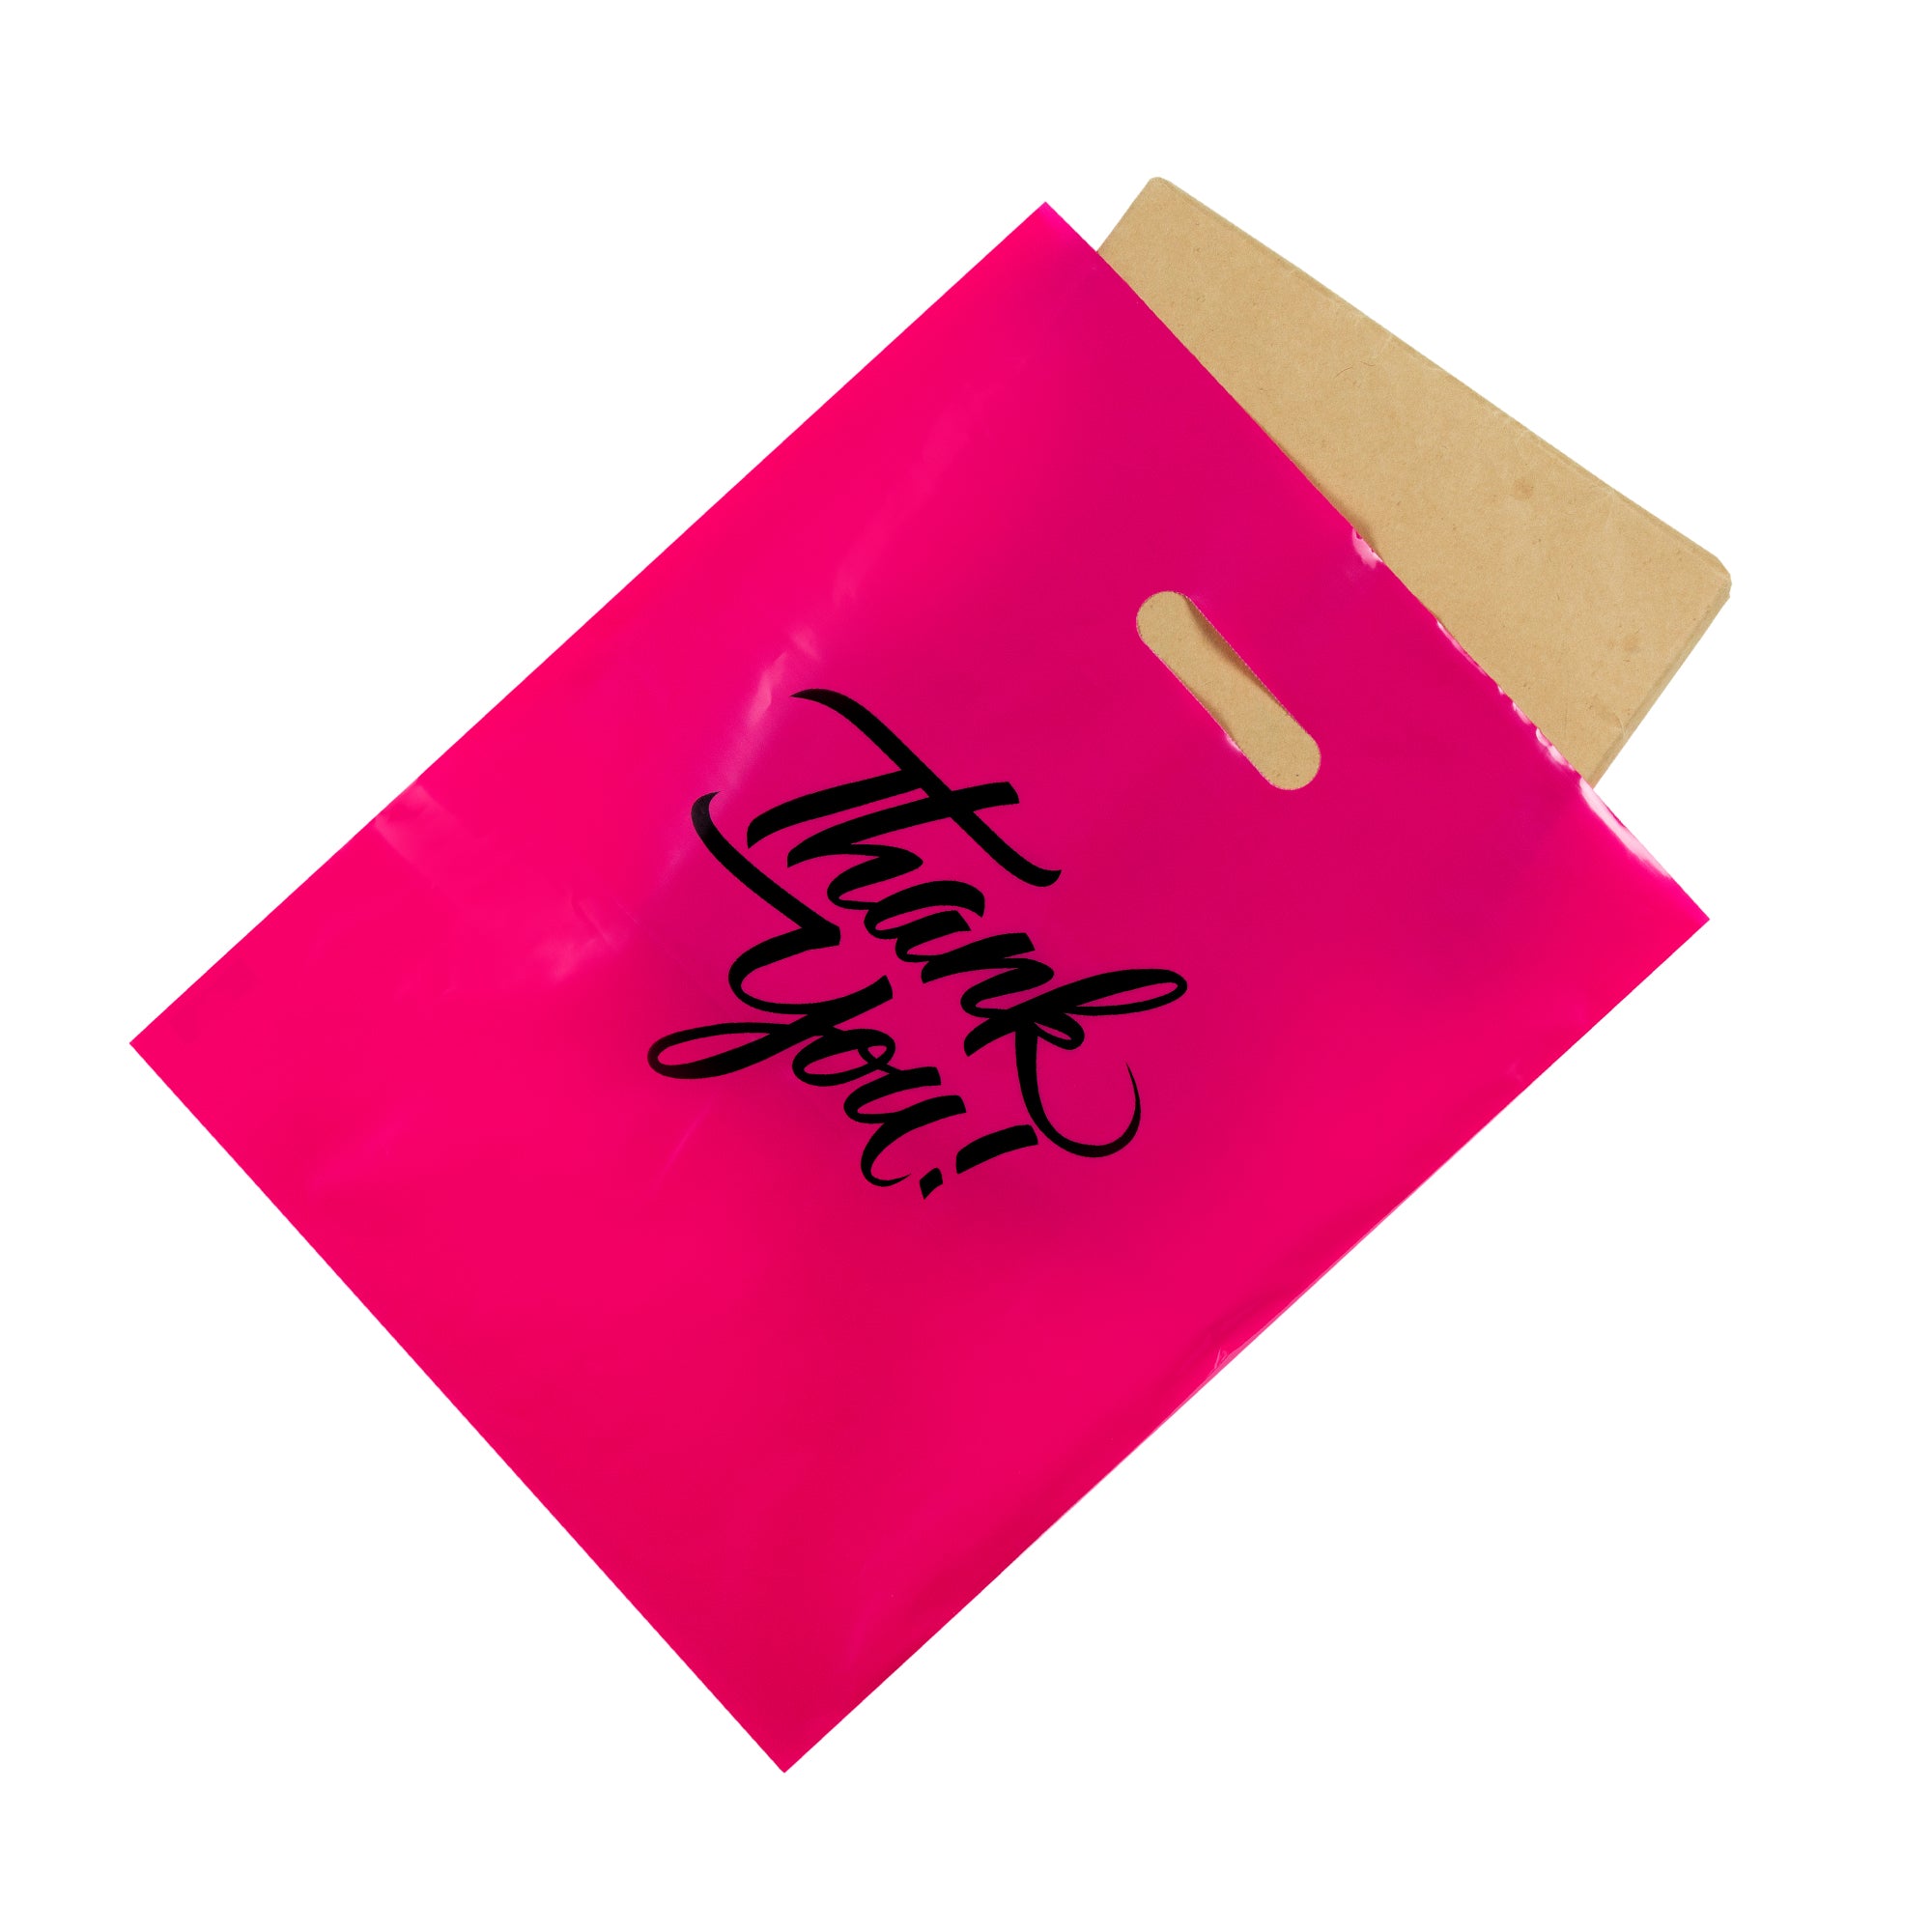 12 x 15 pink thank you bag with object inside 